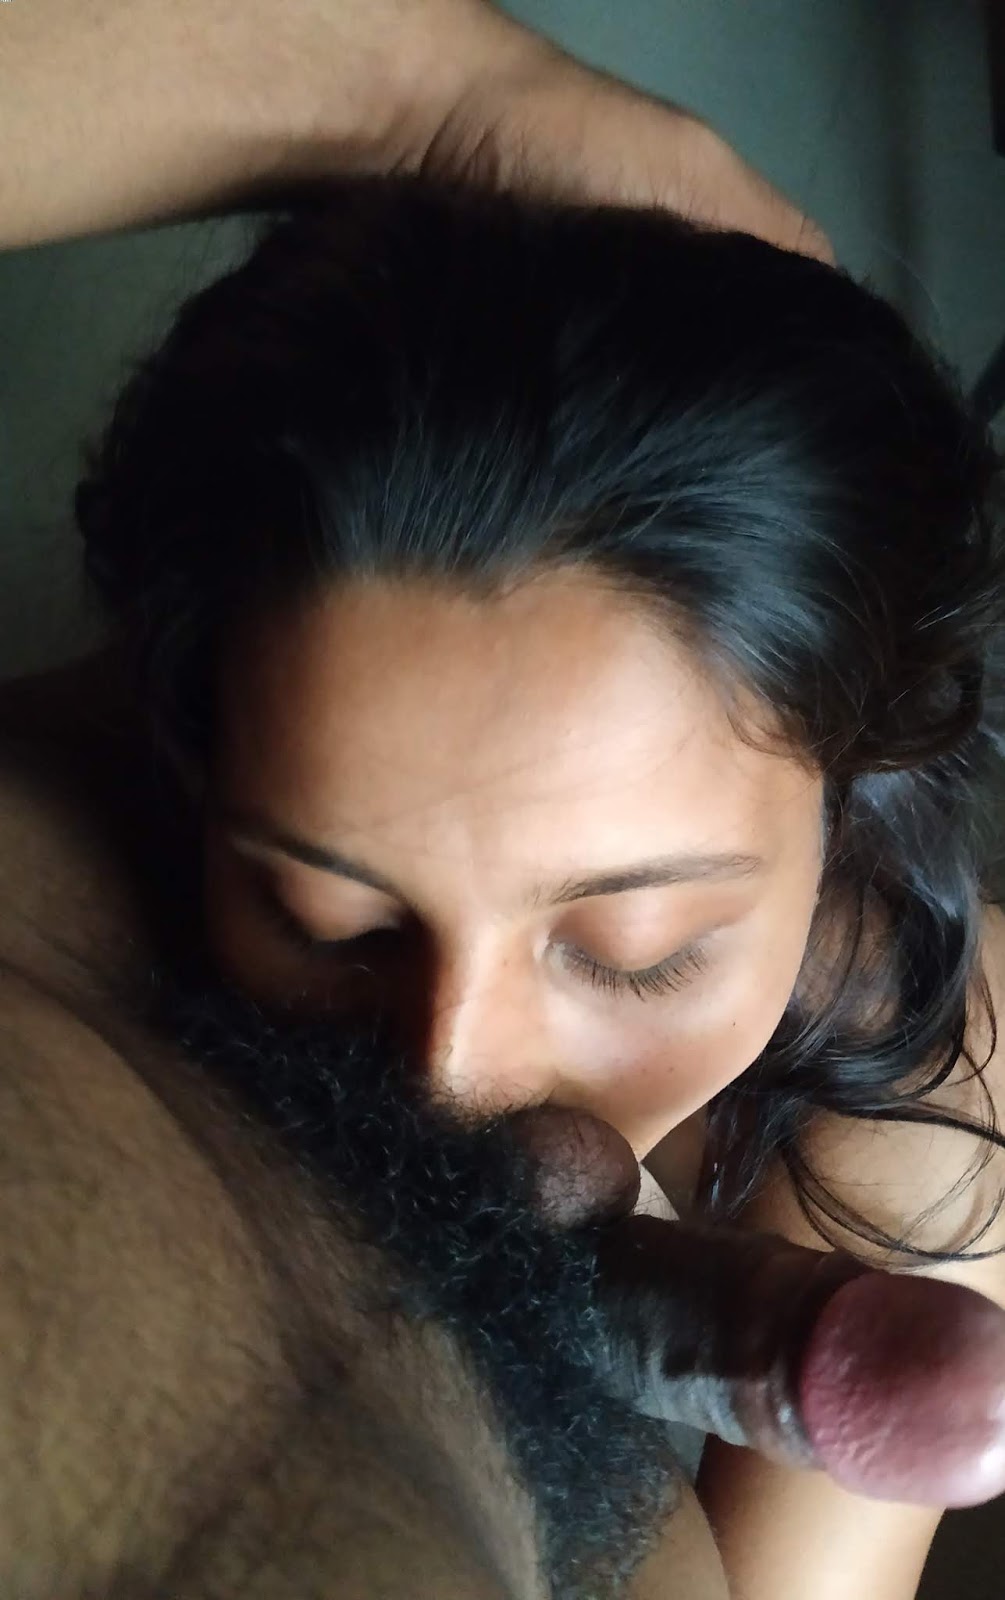 Hot Indian Housewife Nude - Hot Desi Wife Nude Blowob Pov Photos | Desixnxx2.Net